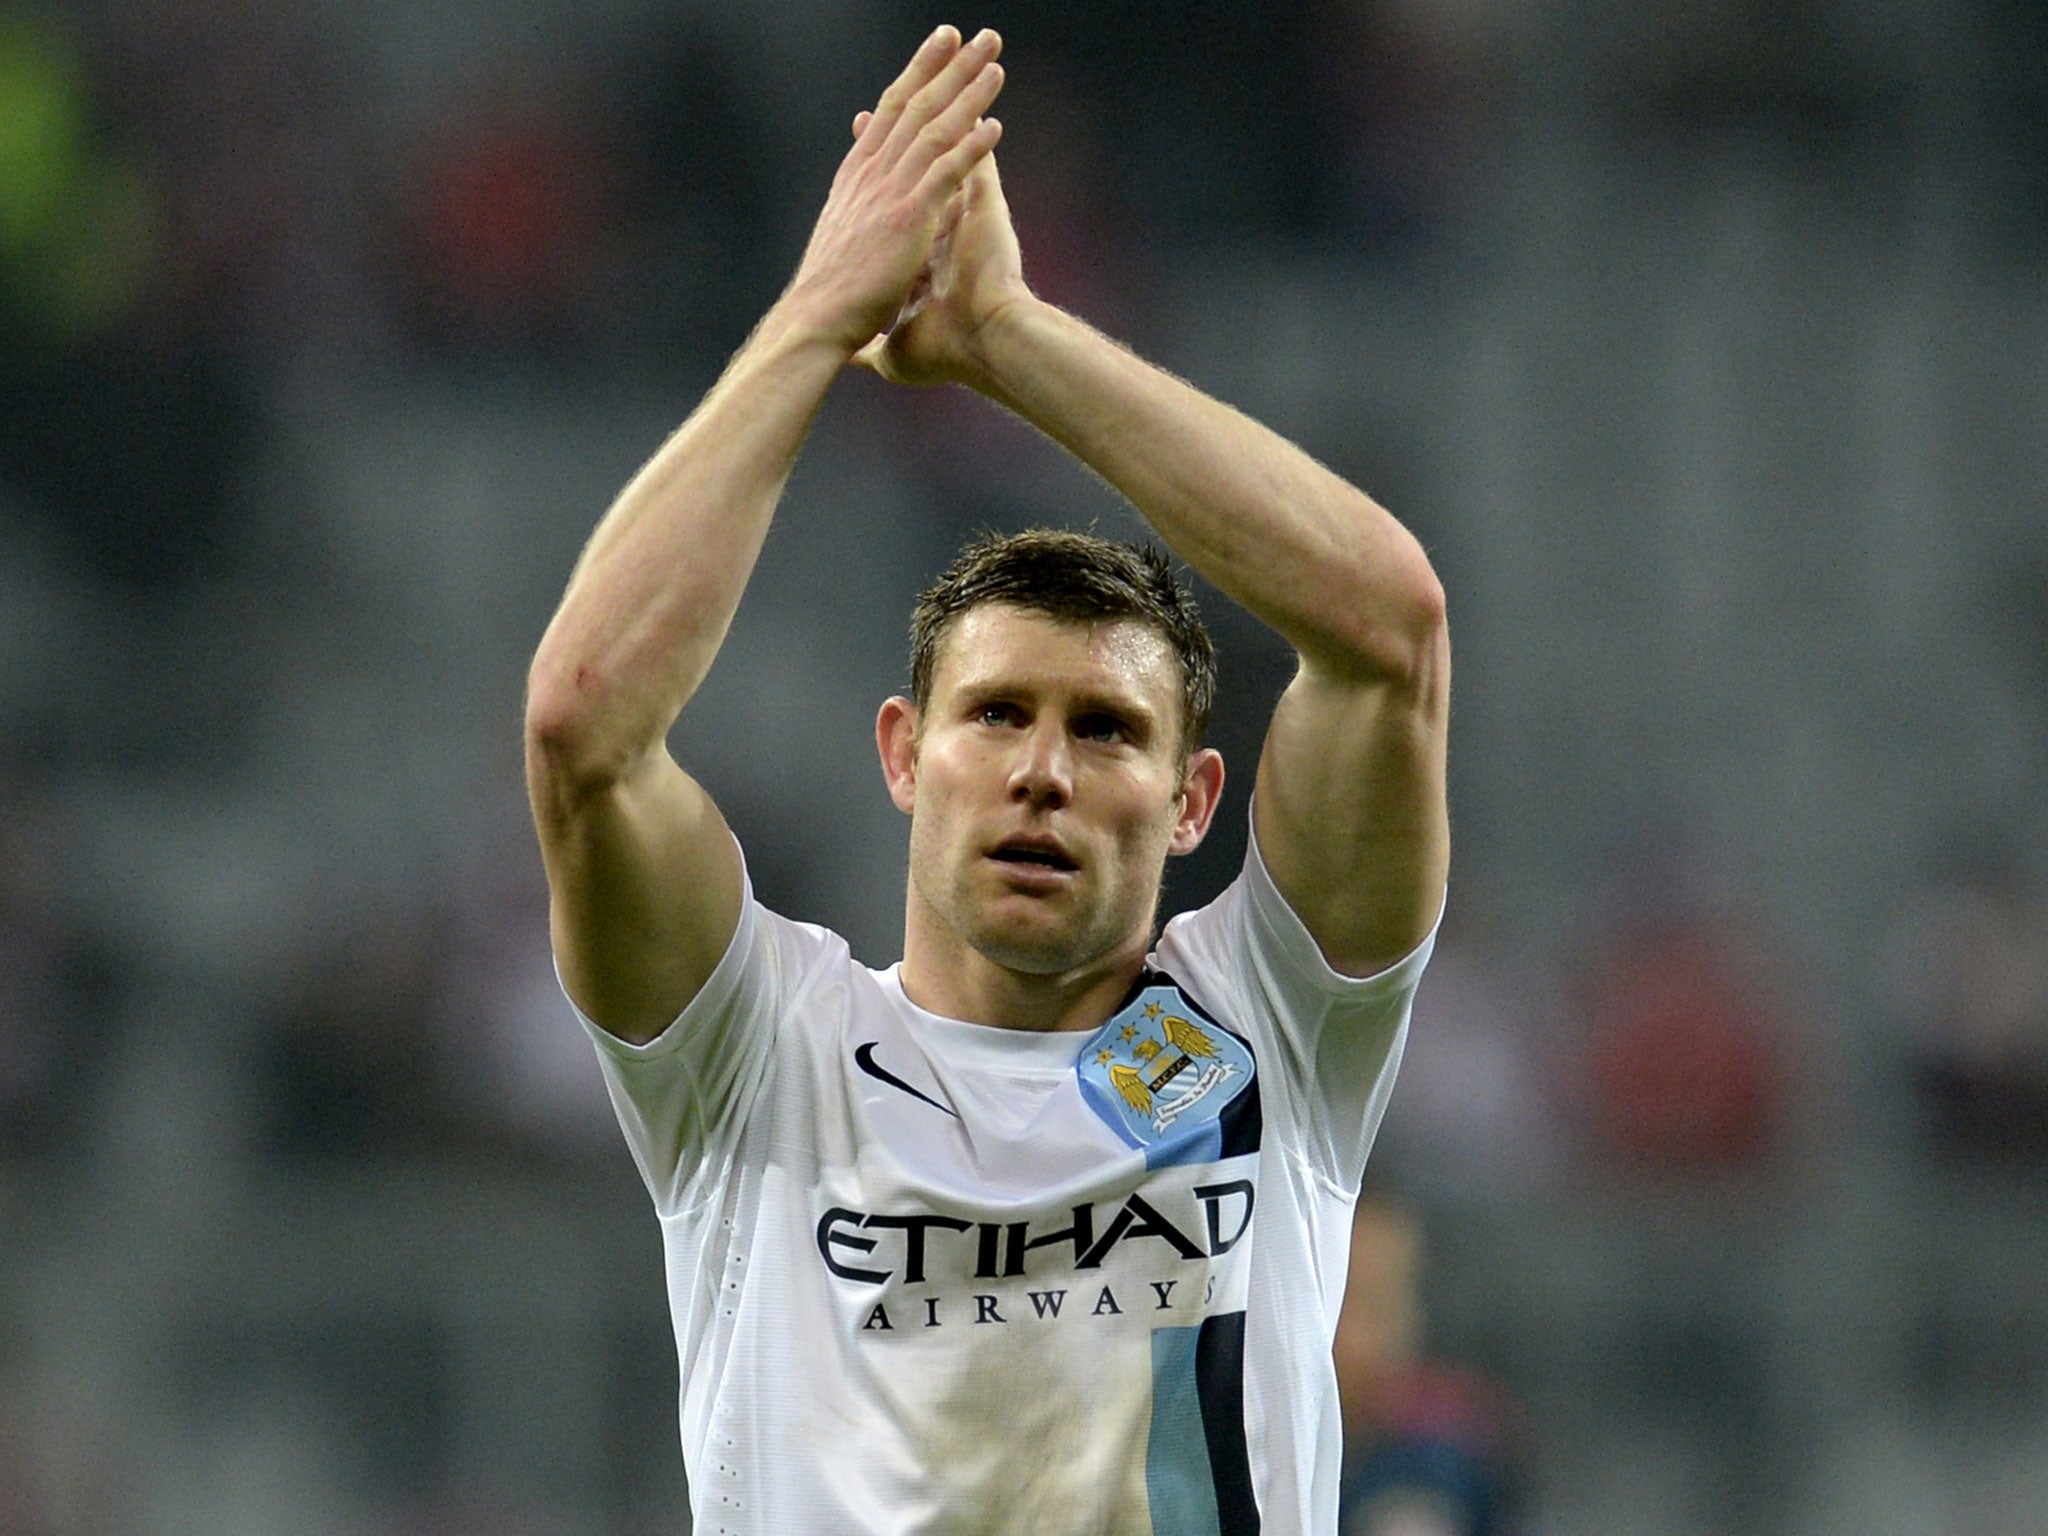 James Milner applauds the fans after Manchester City's 3-2 win at Bayern Munich